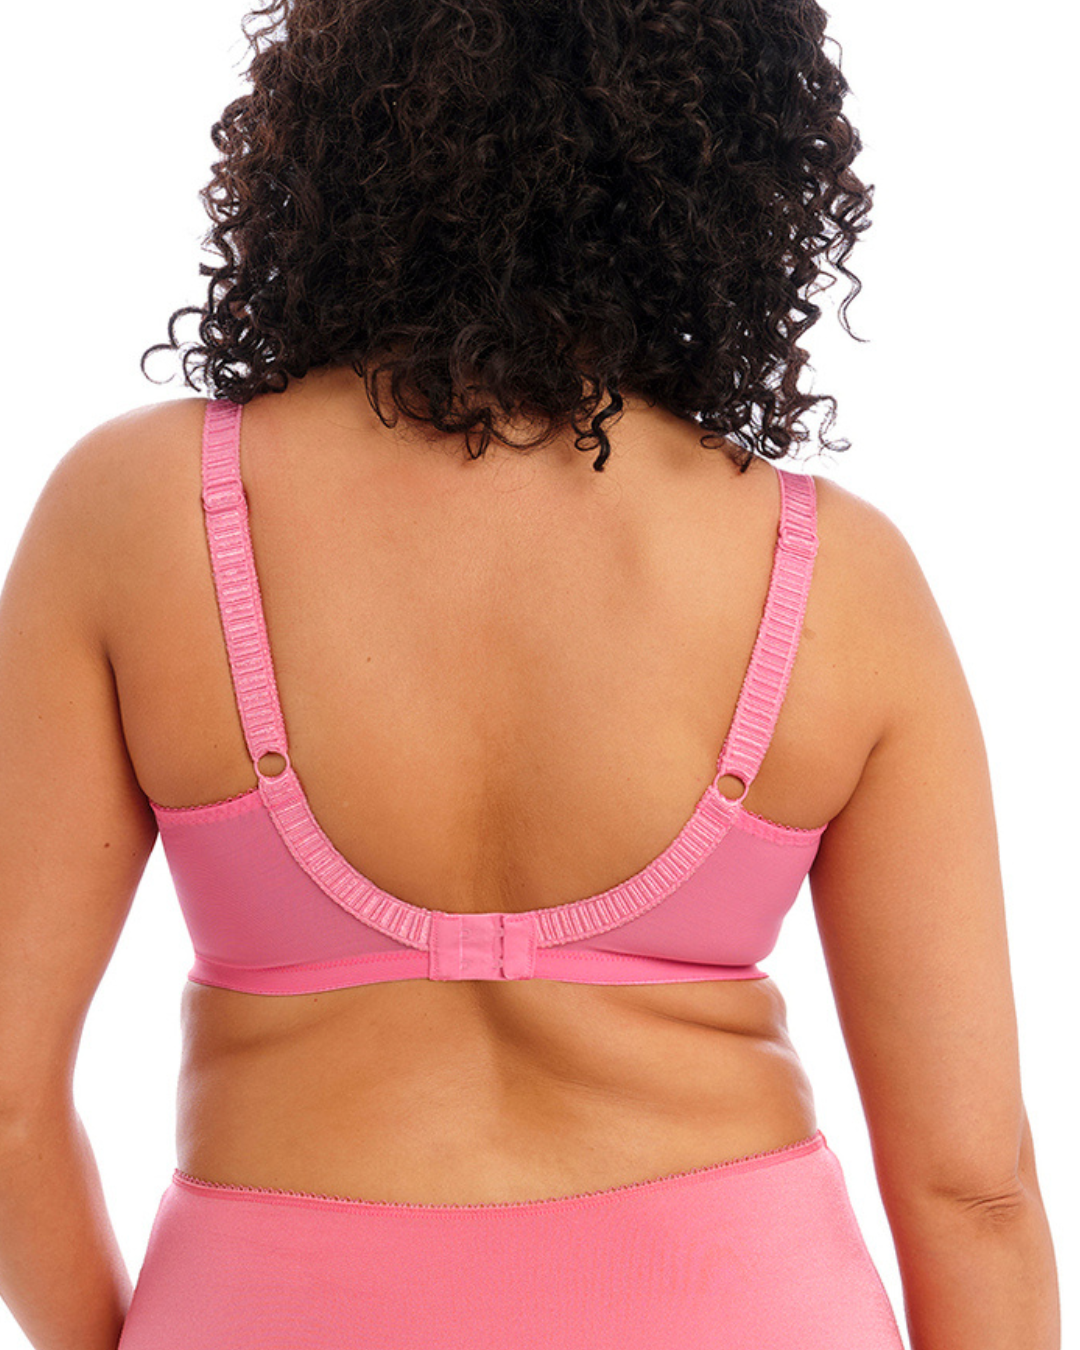 Model wearing a soft cup underwire bra in pink